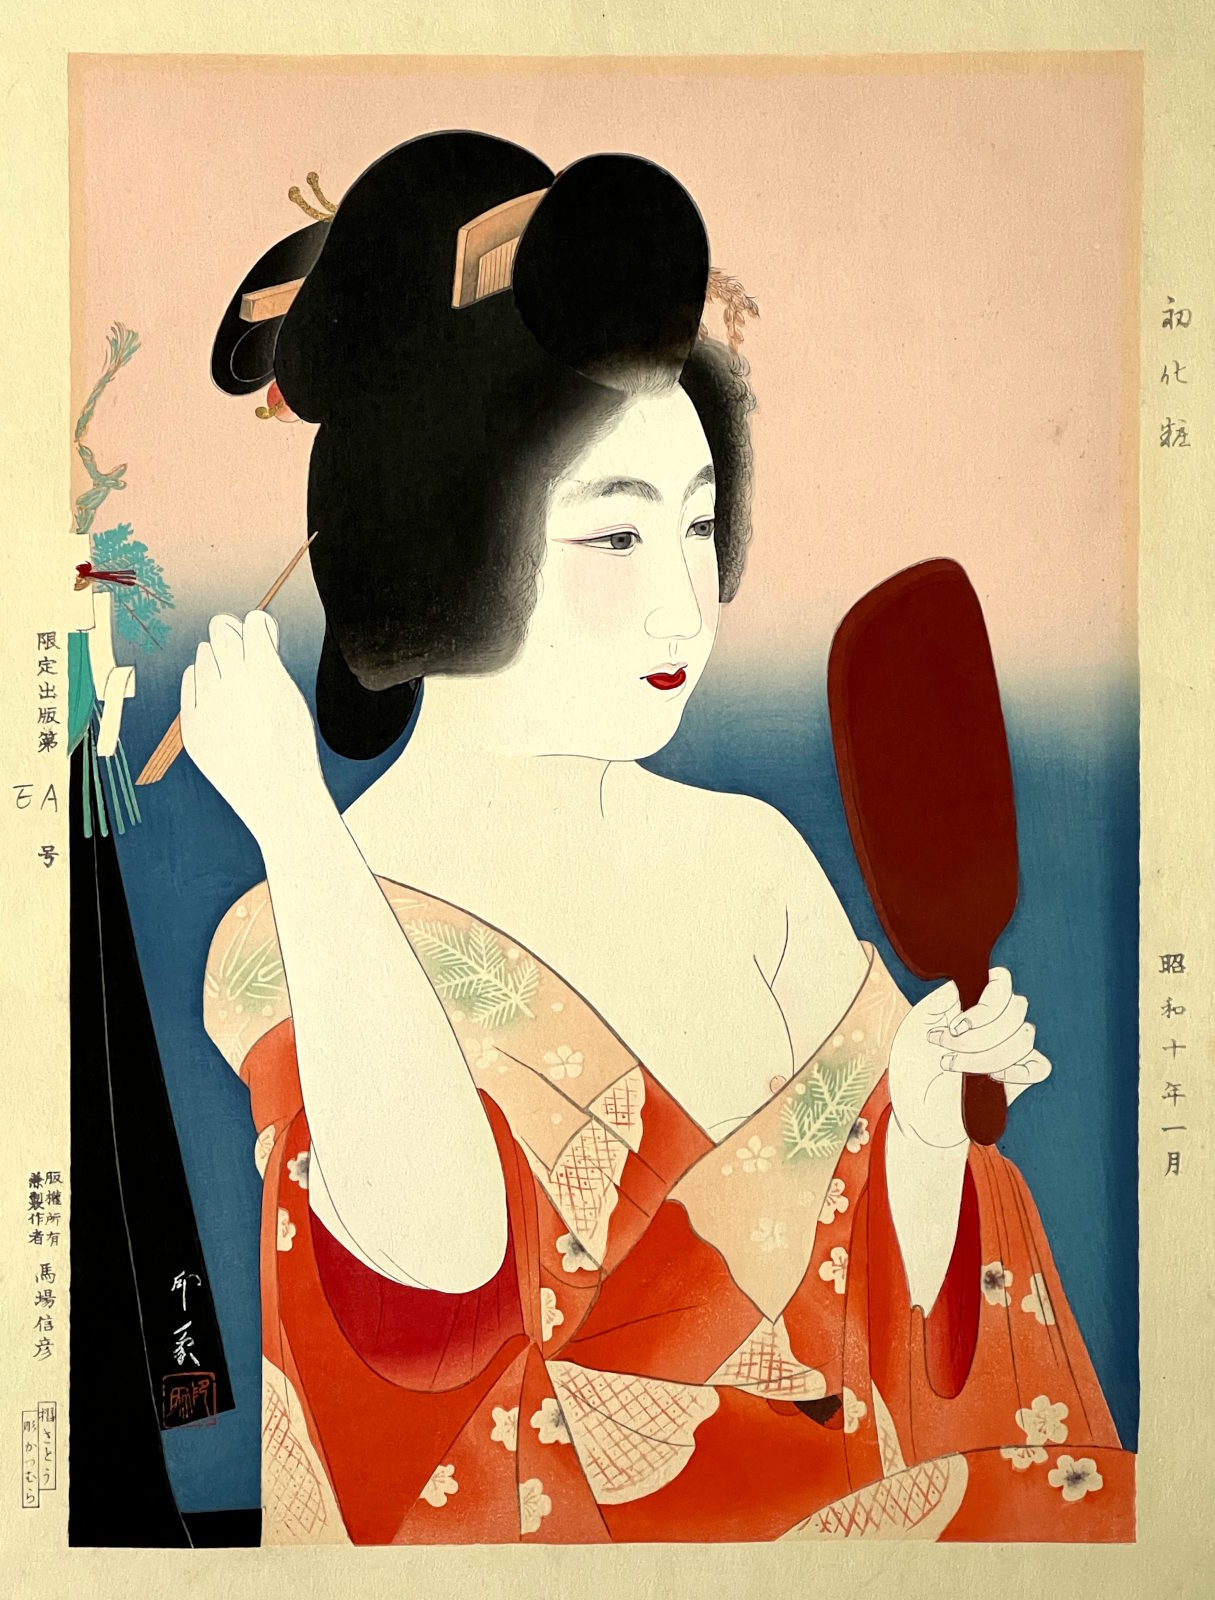 Domoto Insho “First Make-Up of the New Year” 1935 woodblock print